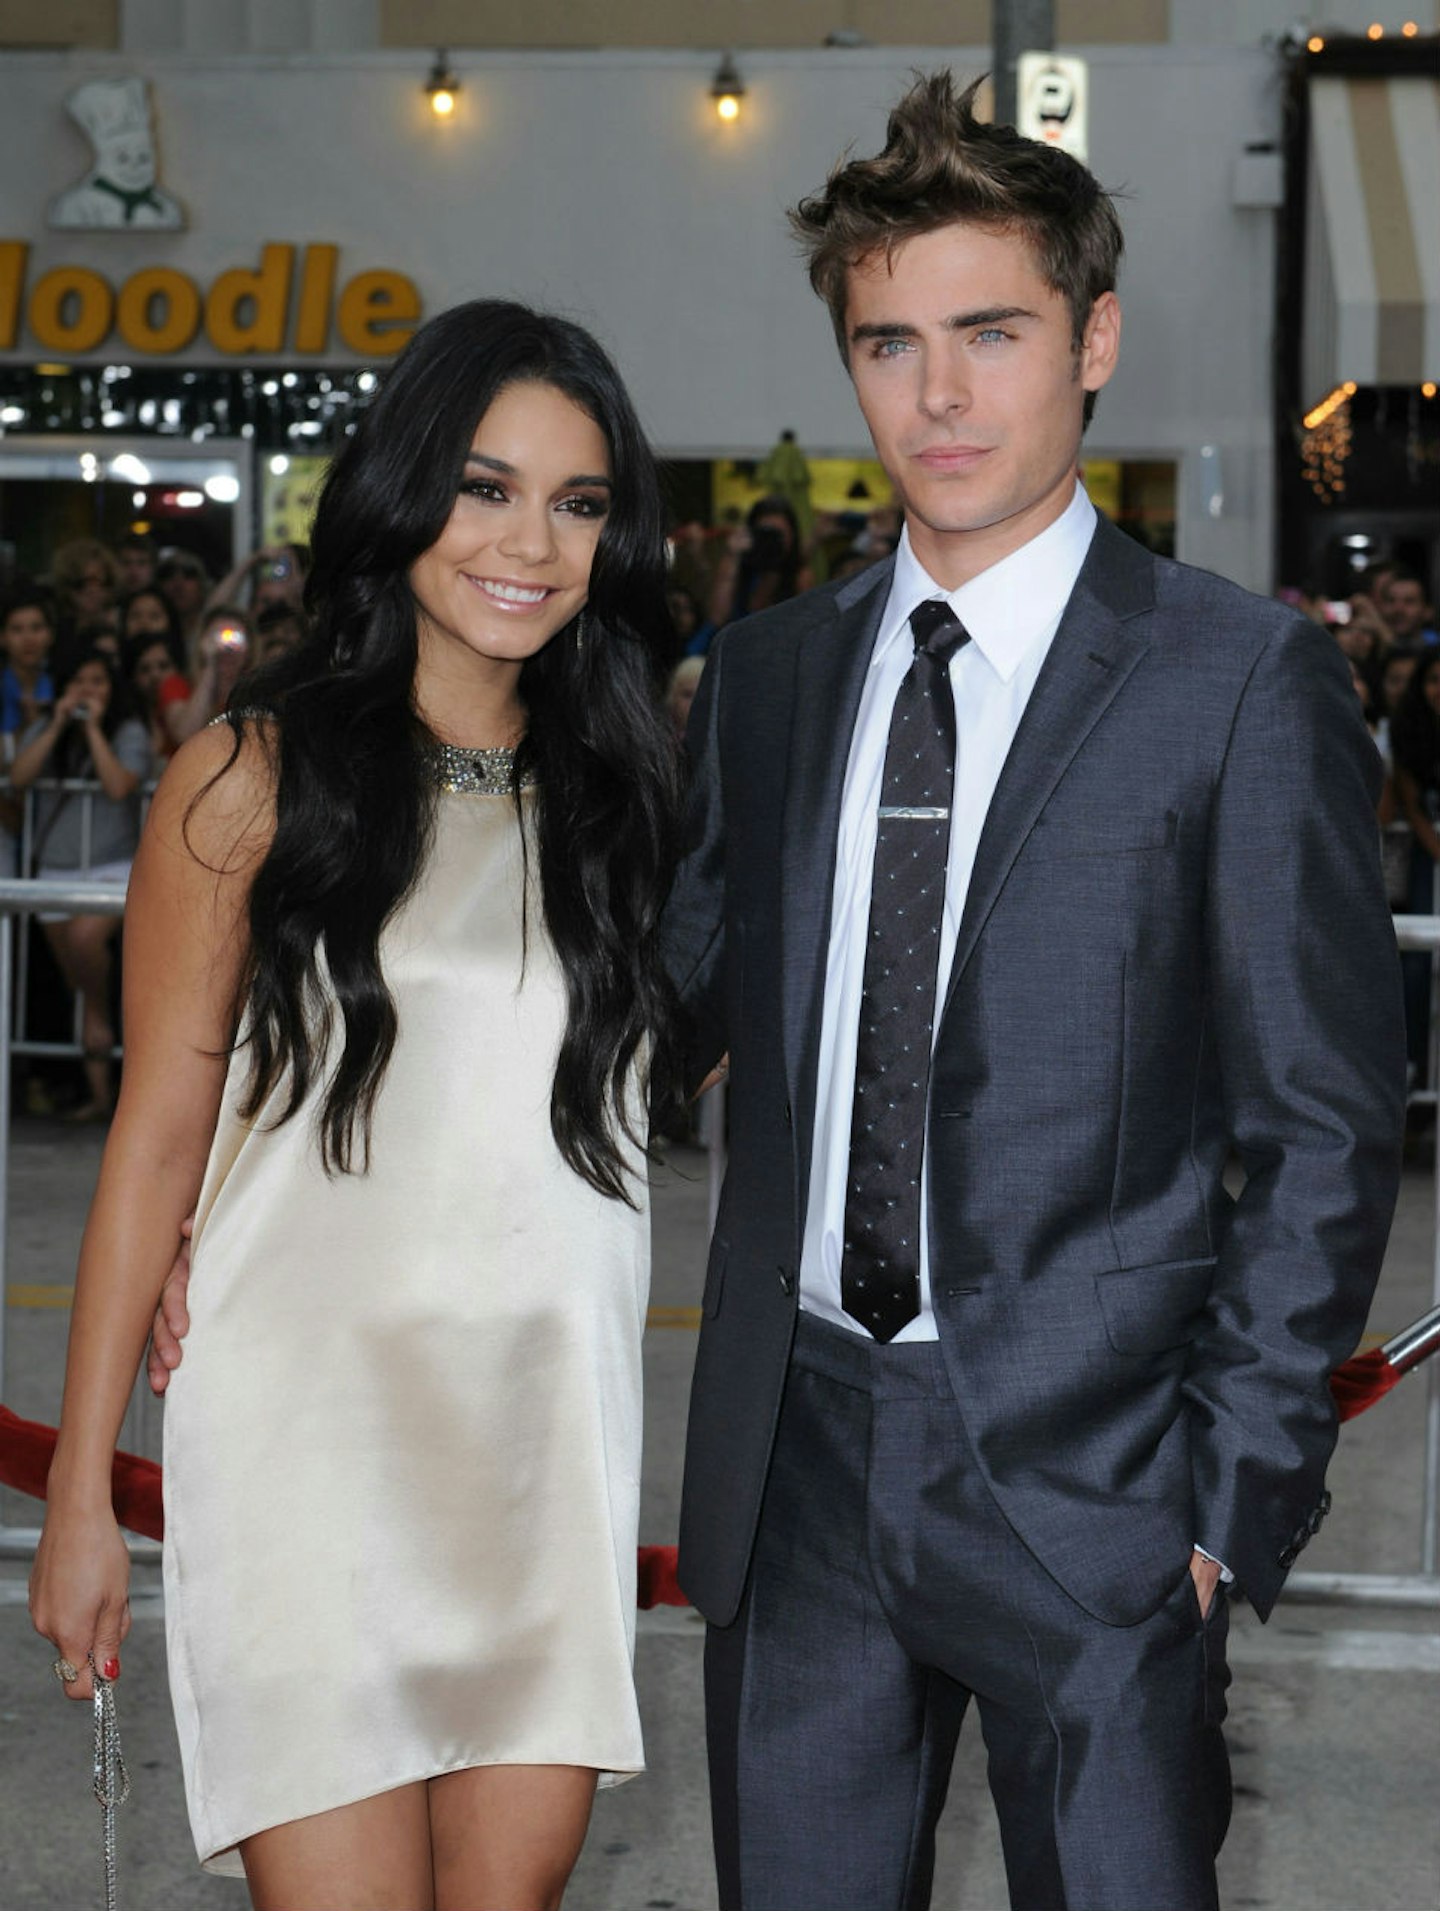 Vanessa with Zac in 2010.